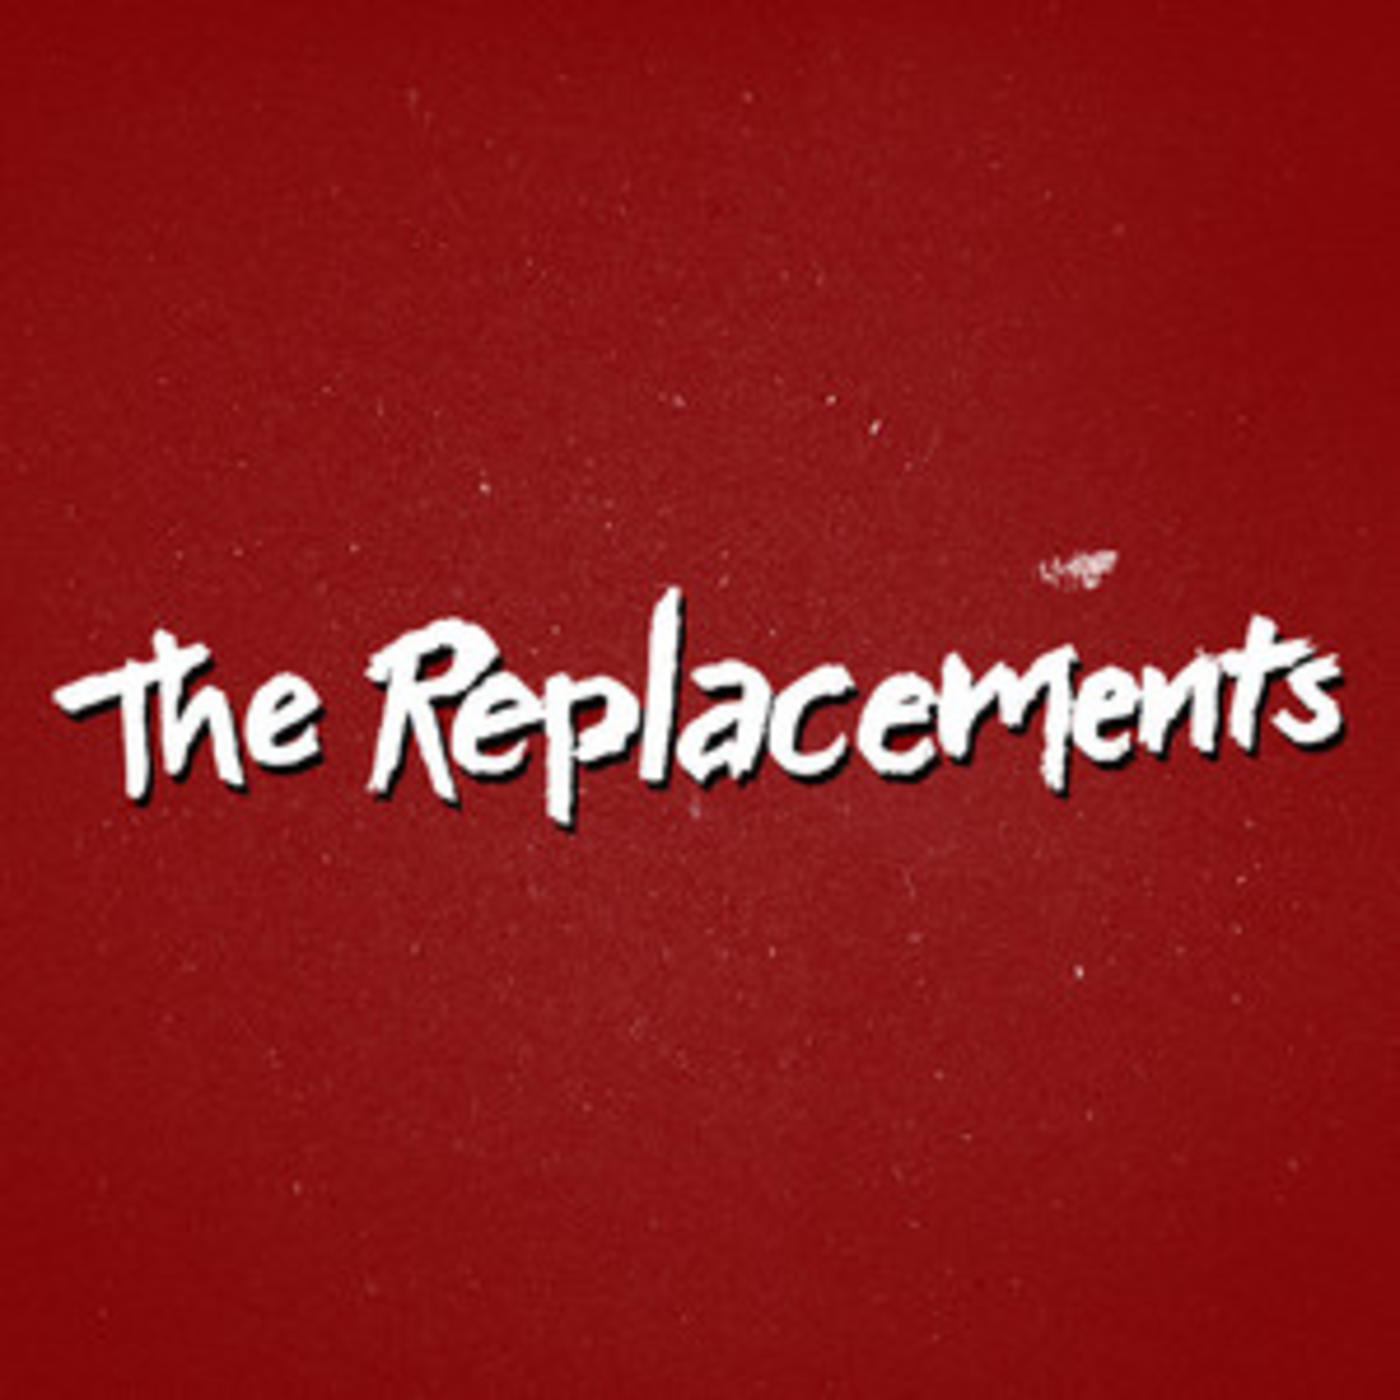 The Replacements Official Playlist - Bastards of Young, Alex Chilton, Left of the Dial, I'll Be You